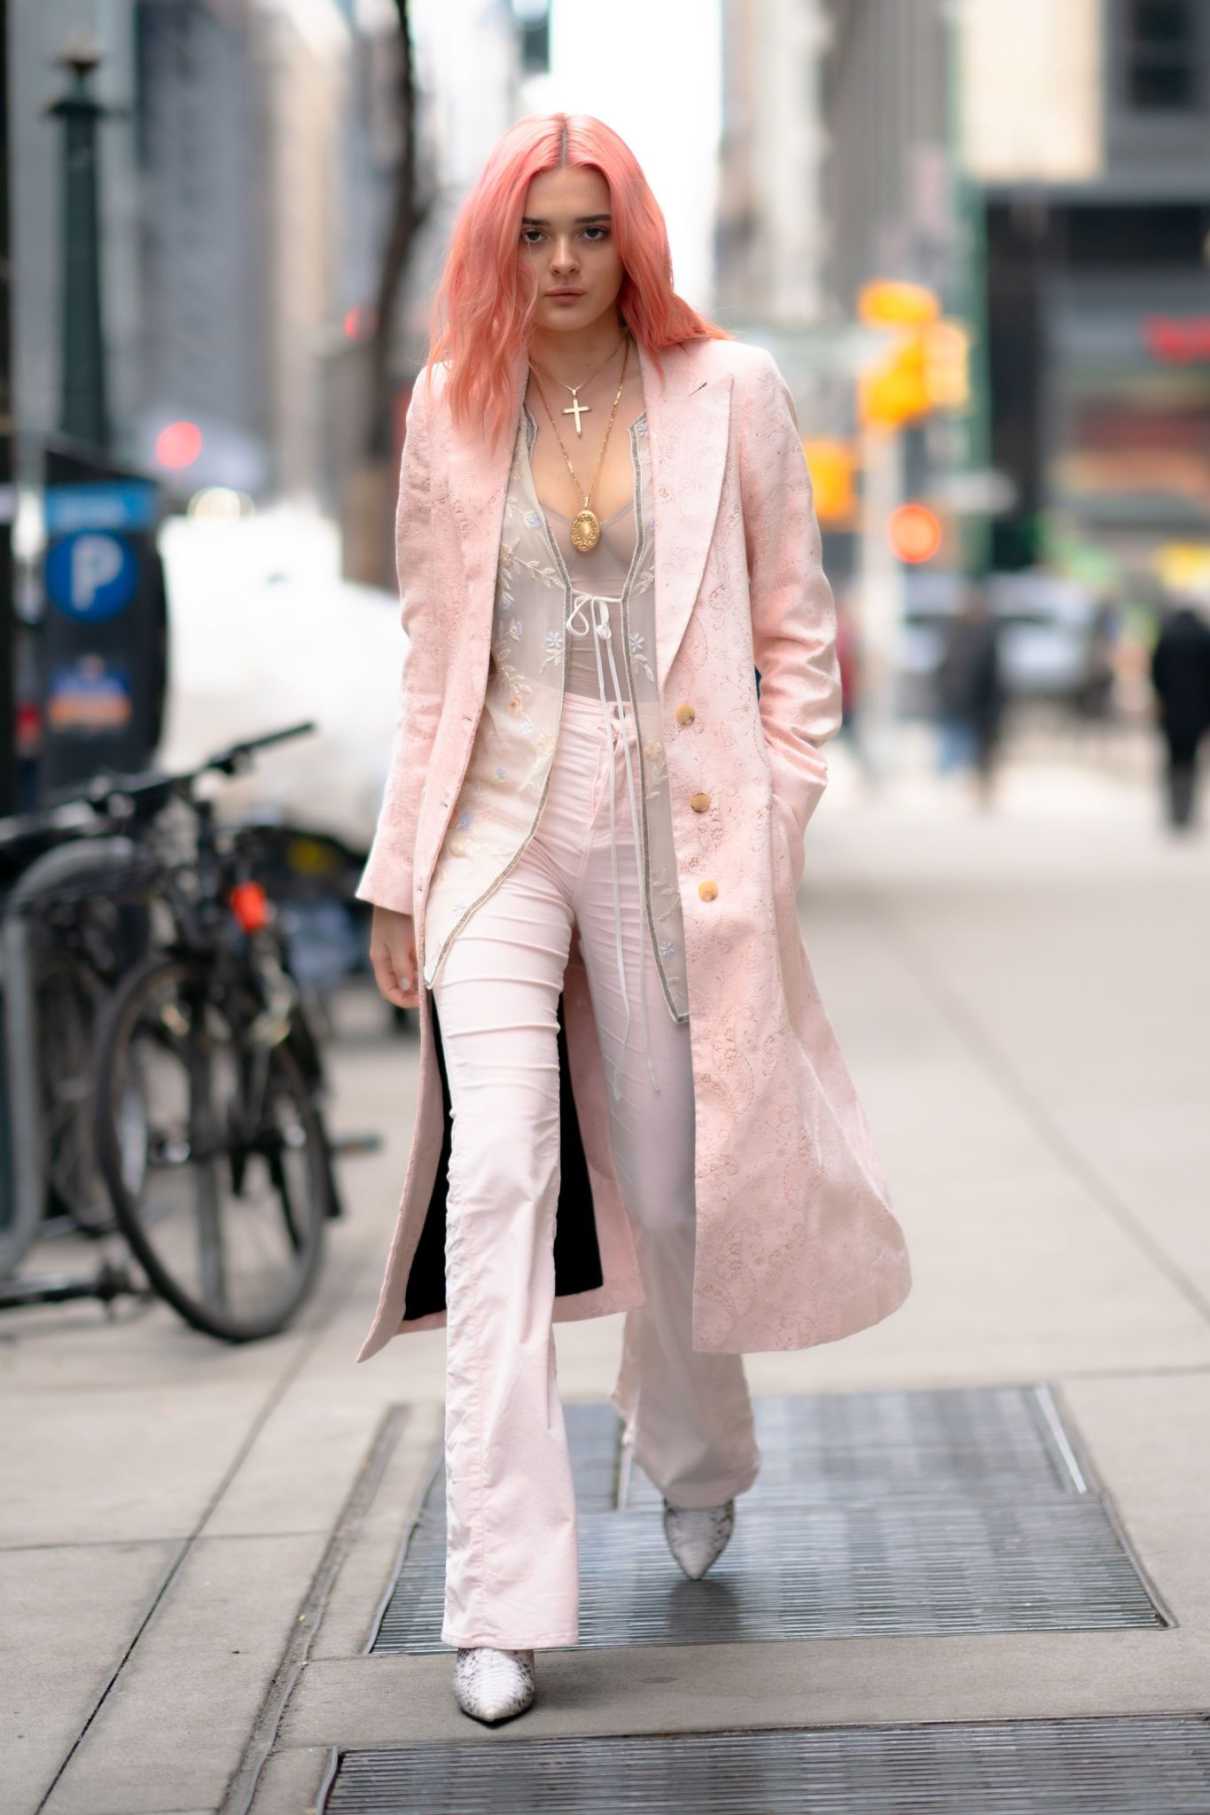 Charlotte Lawrence in a Pink Coat